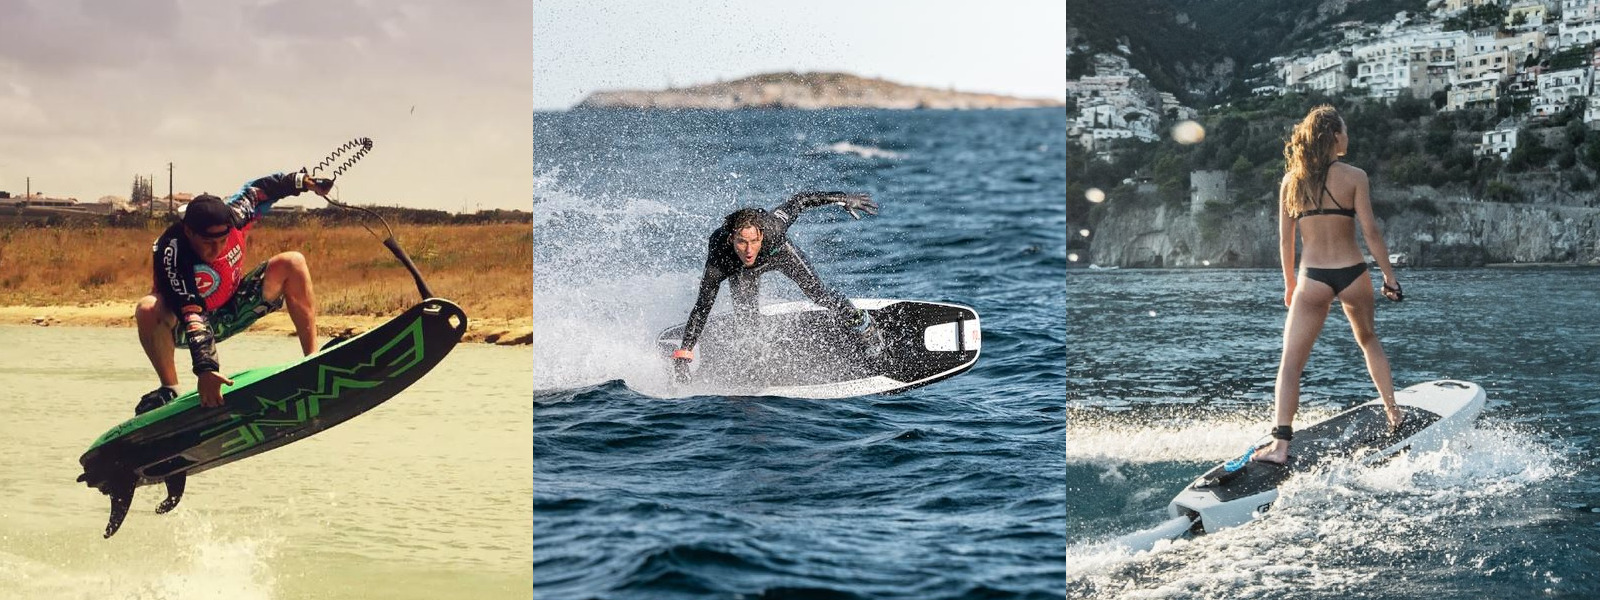 Electric Jetboards and Surfboards Banner